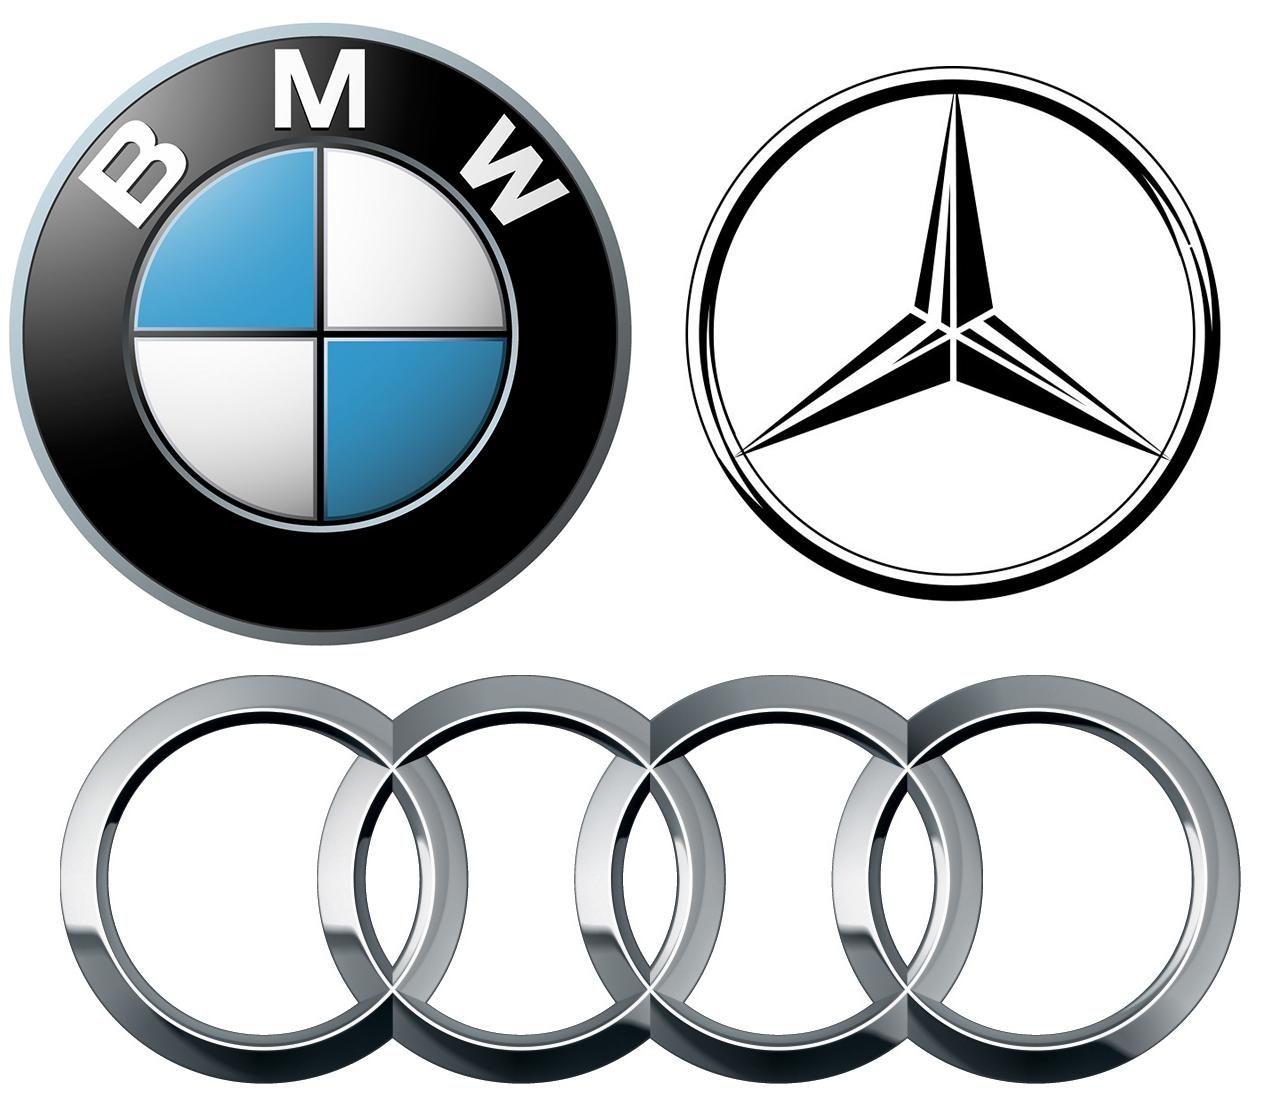 Mercedes Car Logo - Mercedes Benz Finishes Ahead Of Audi And BMW As World's Top Premium